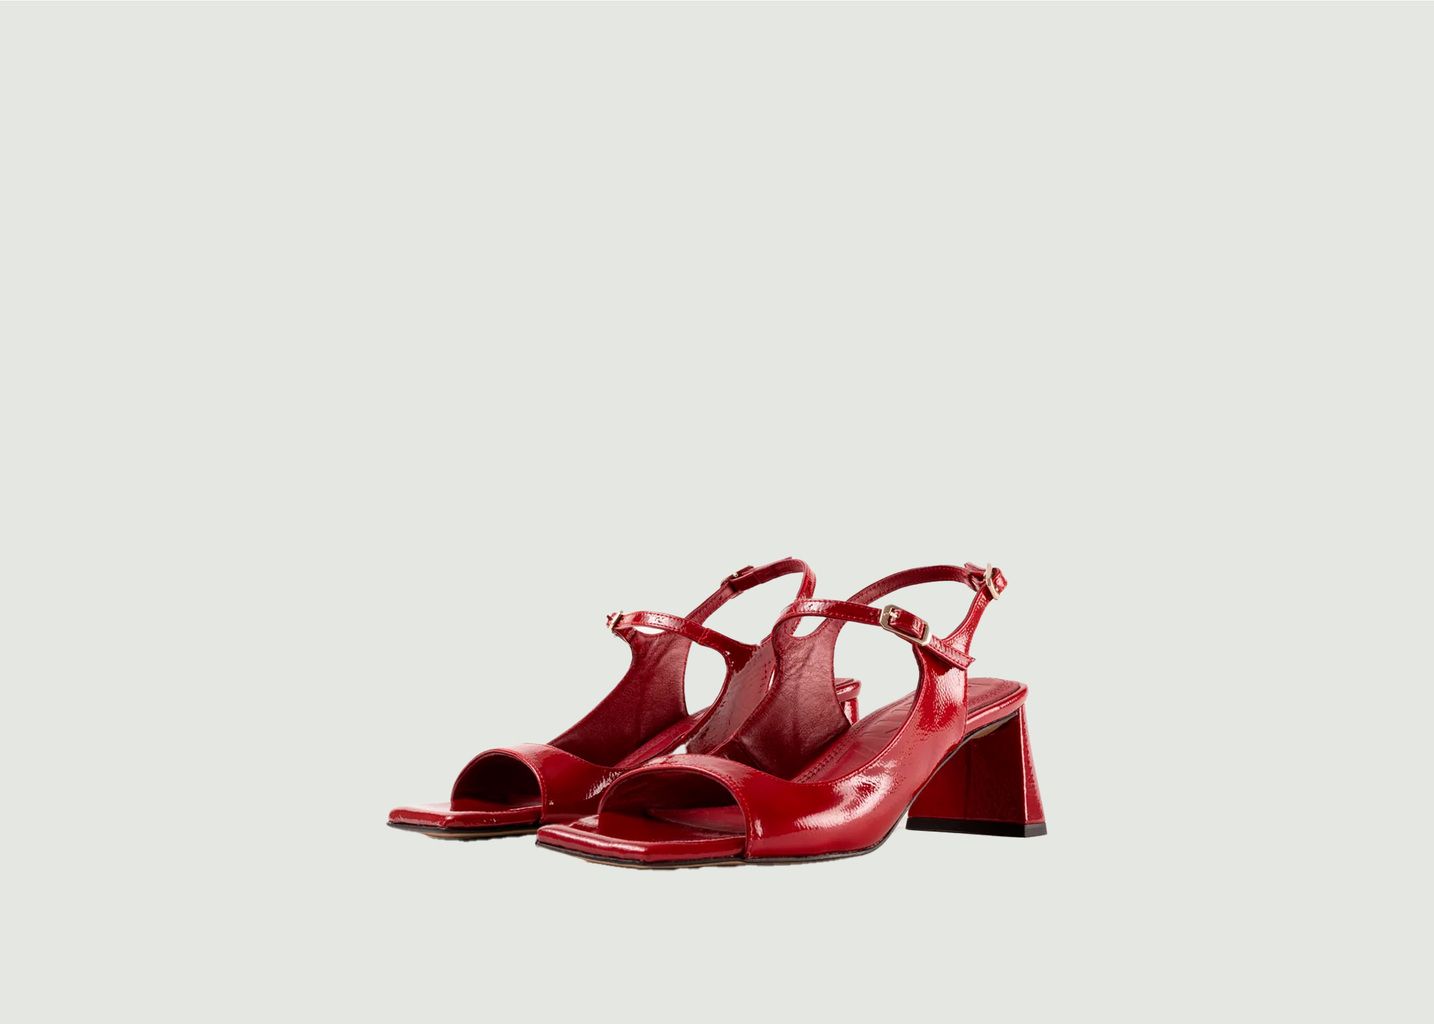 Wrinkled patent leather sandals with Clavel heels - Souliers Martinez